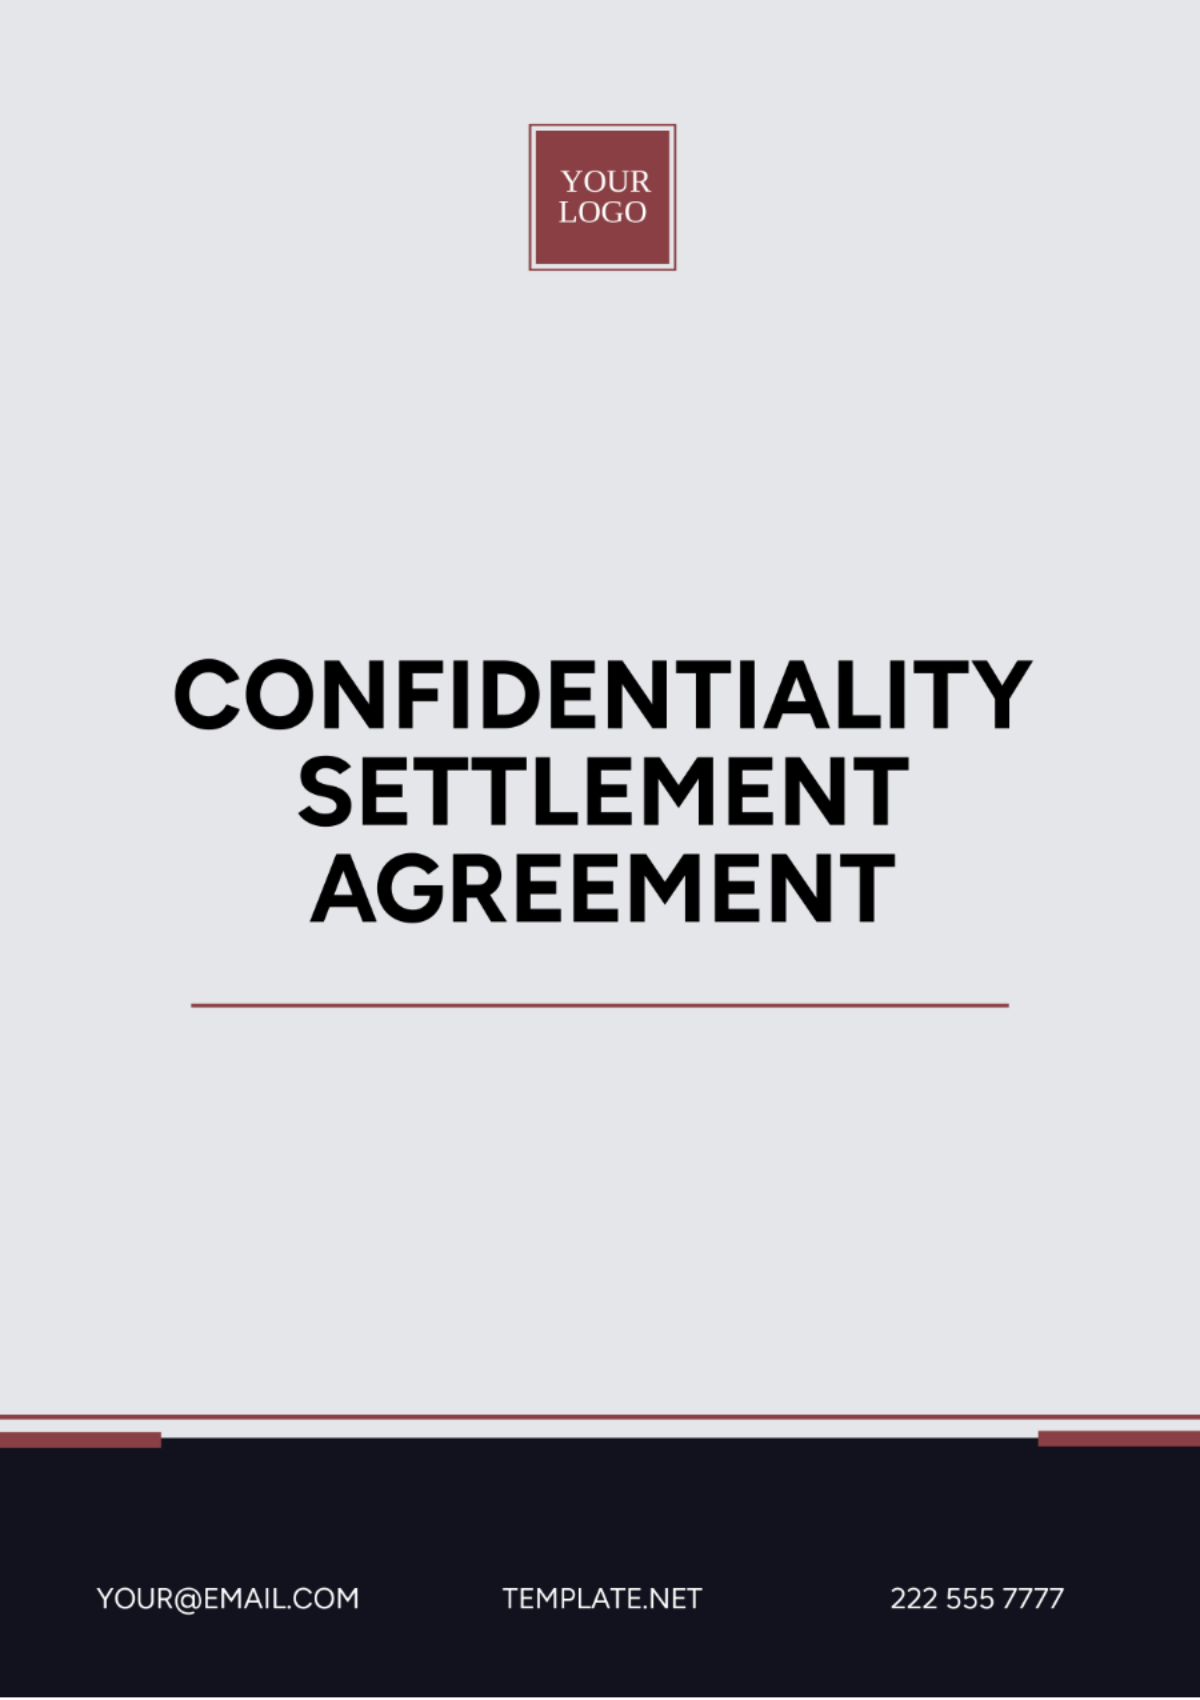 Free Confidentiality Settlement Agreement Template